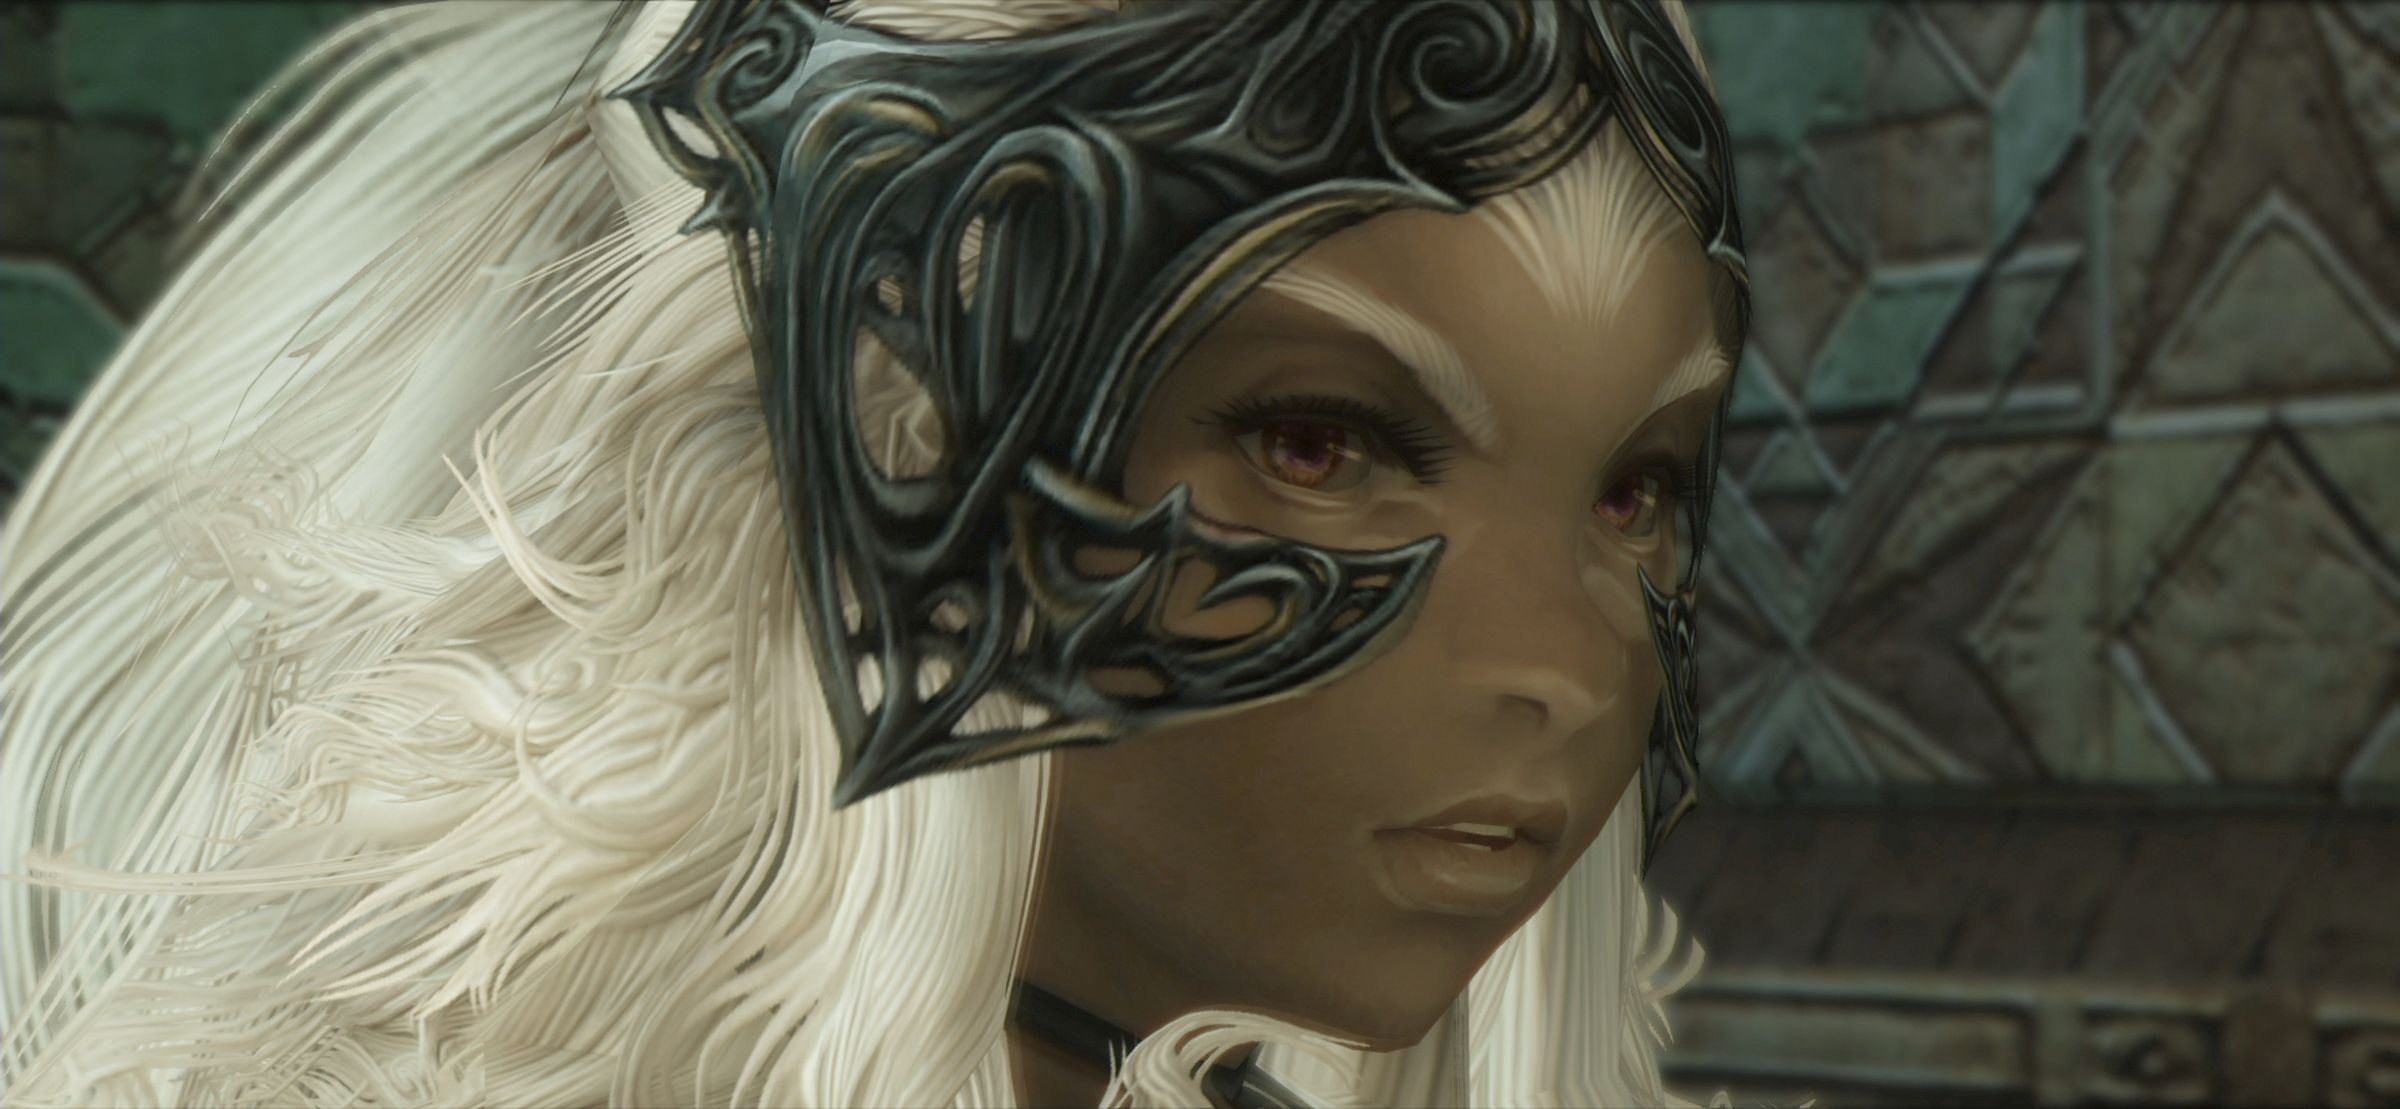 Screenshot from Final Fantasy XII featuring a close up of the character Fran